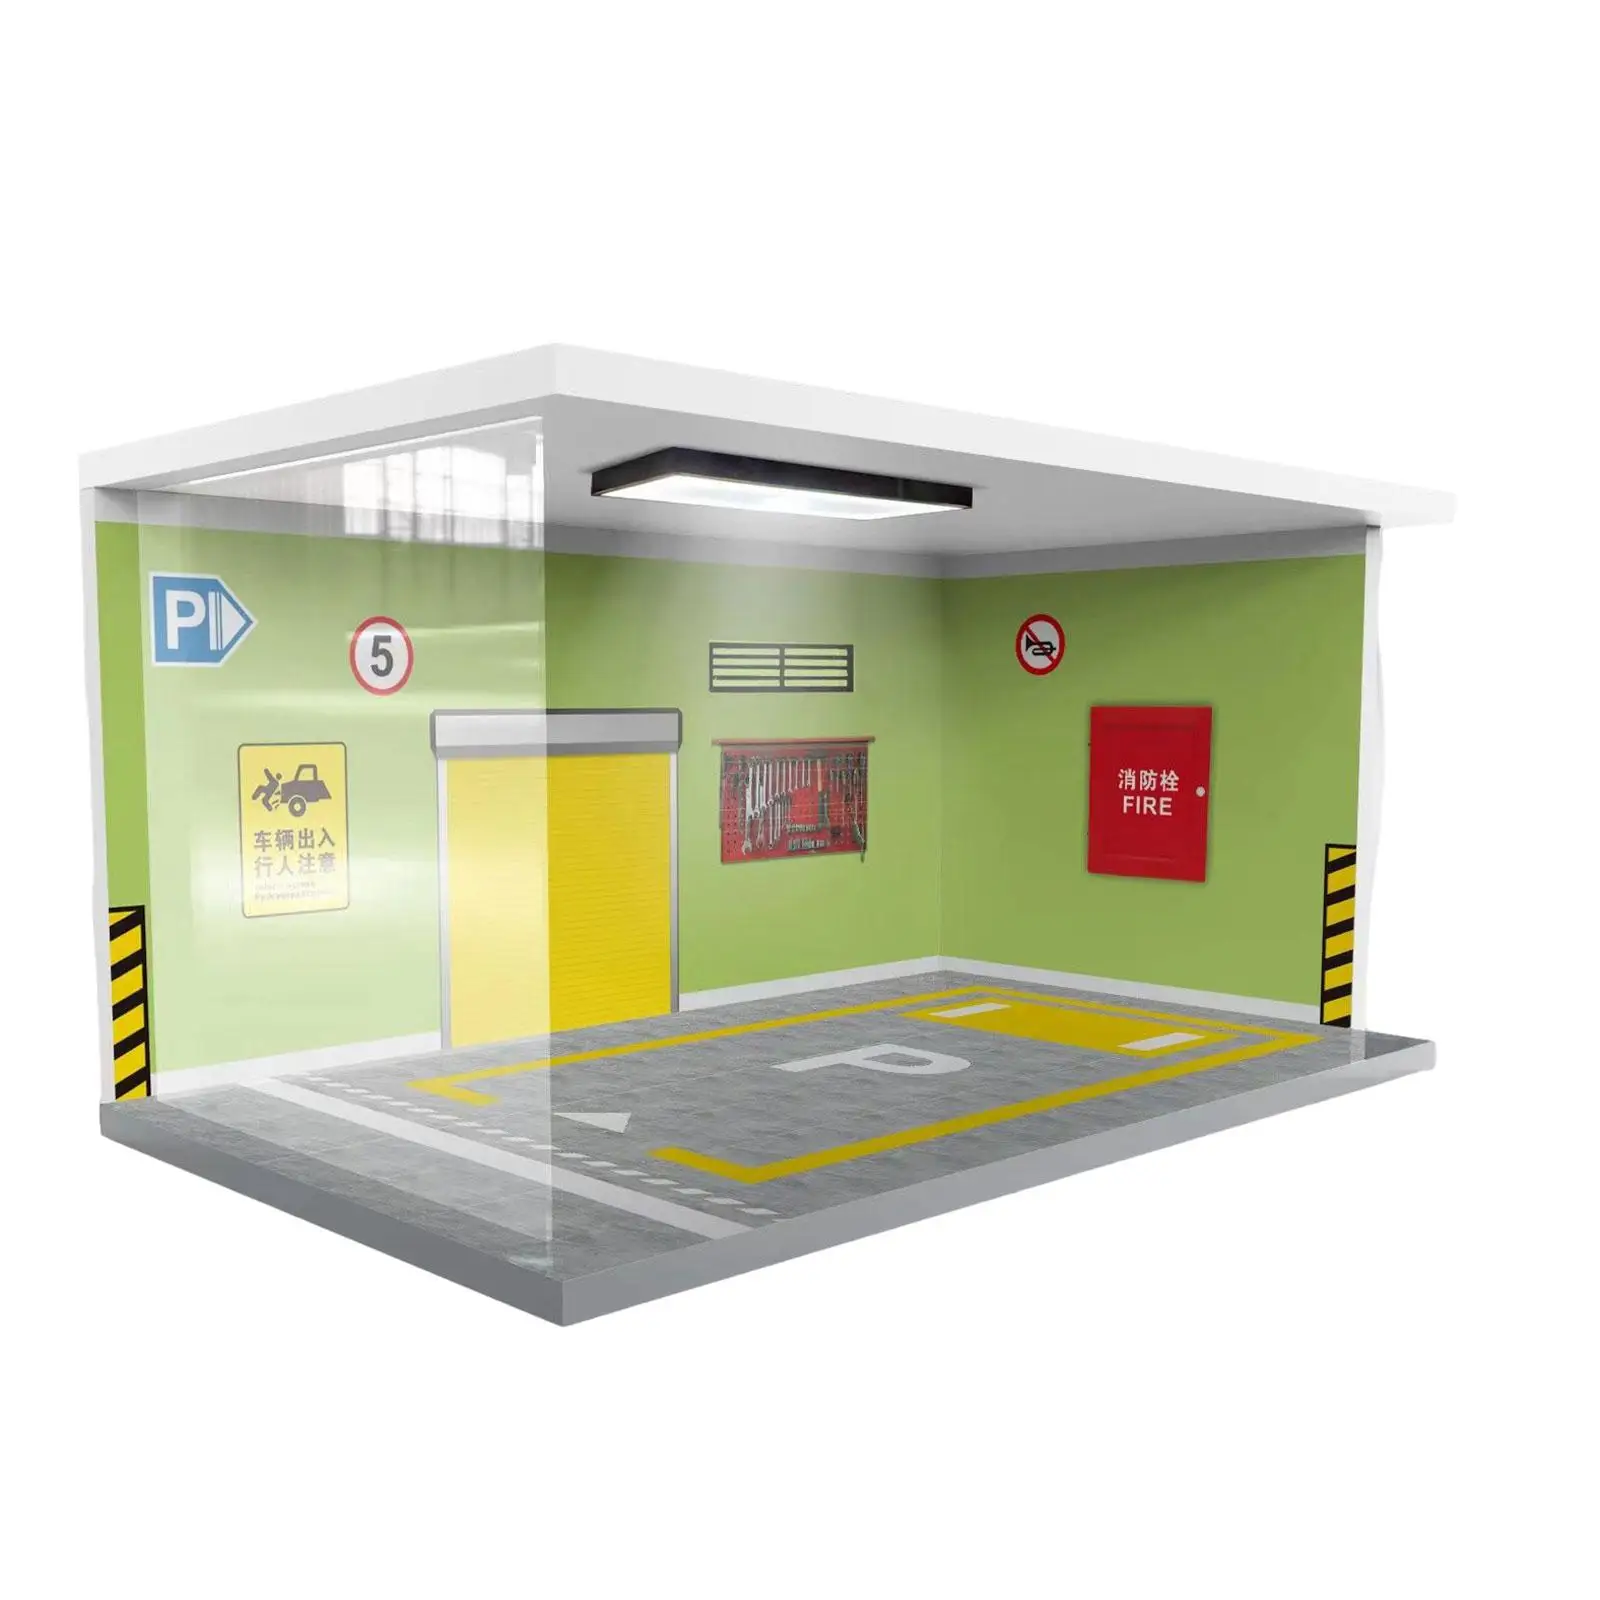 1/24 Scale Parking Lot Scene Model with Acrylic Cover Underground Parking Lot Display Case for Model Car Tabletop Decor